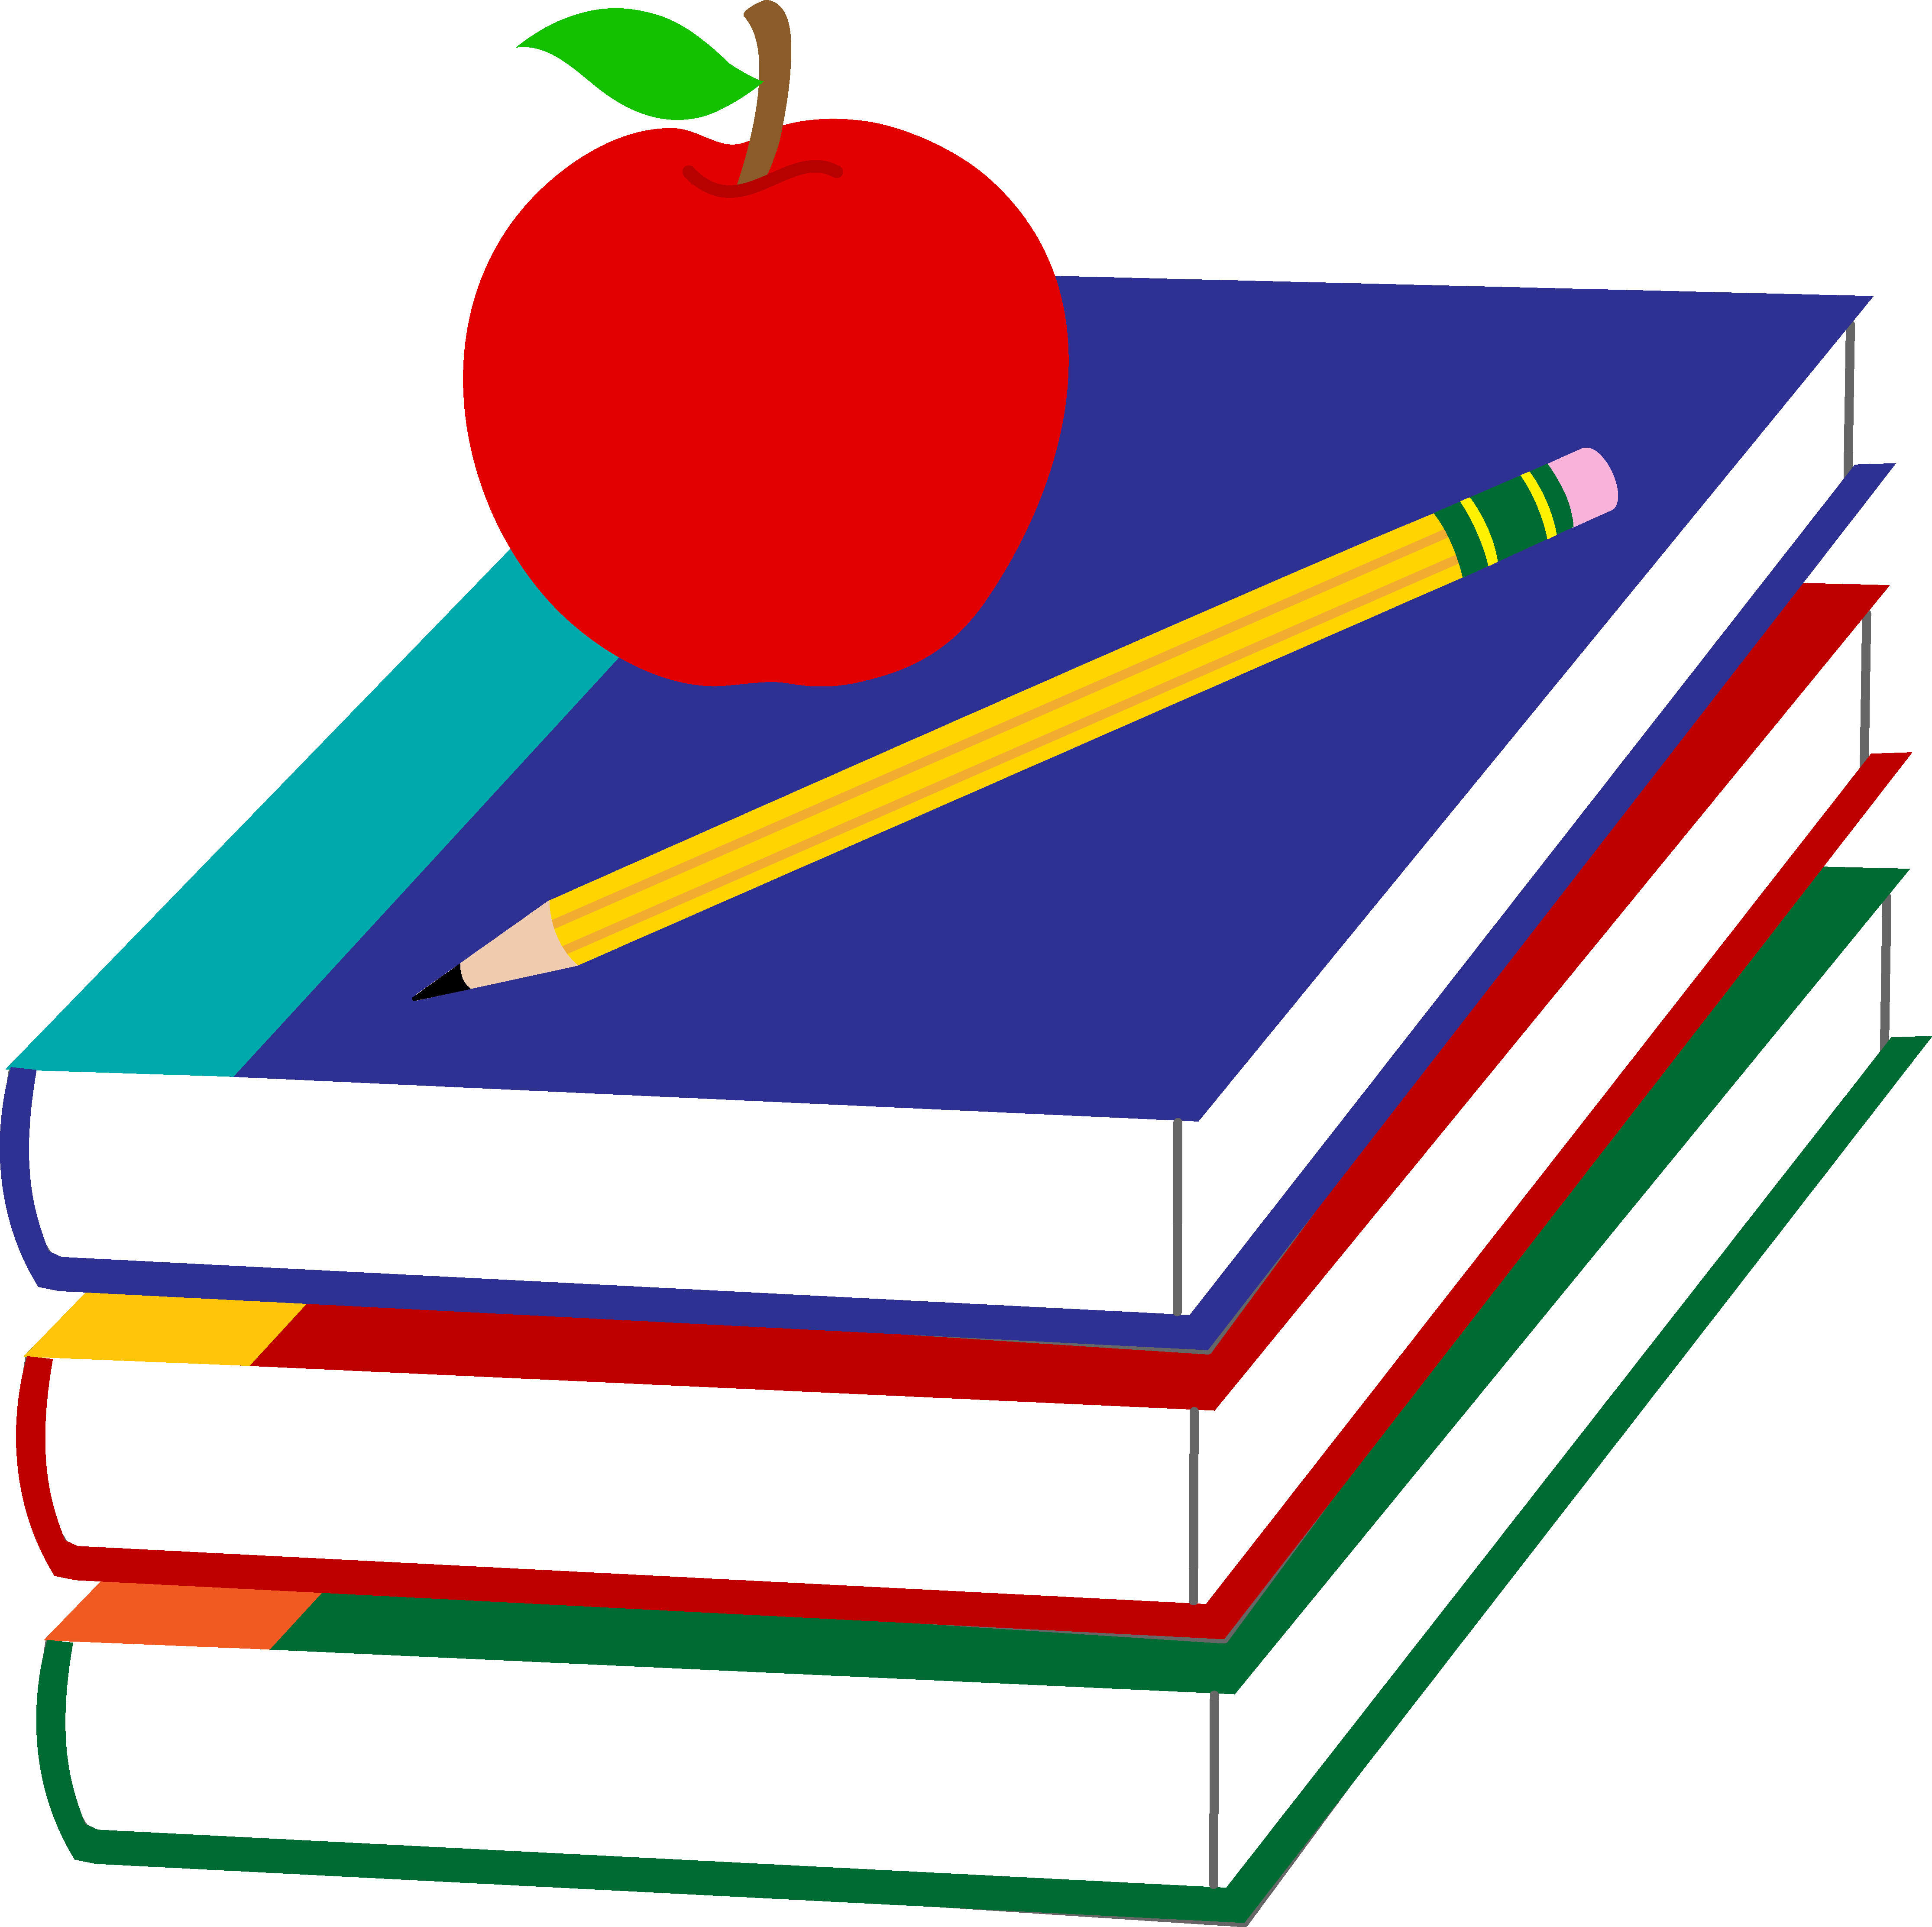 School Books With Apple And Pencil Free Clip Art_sweetclipart